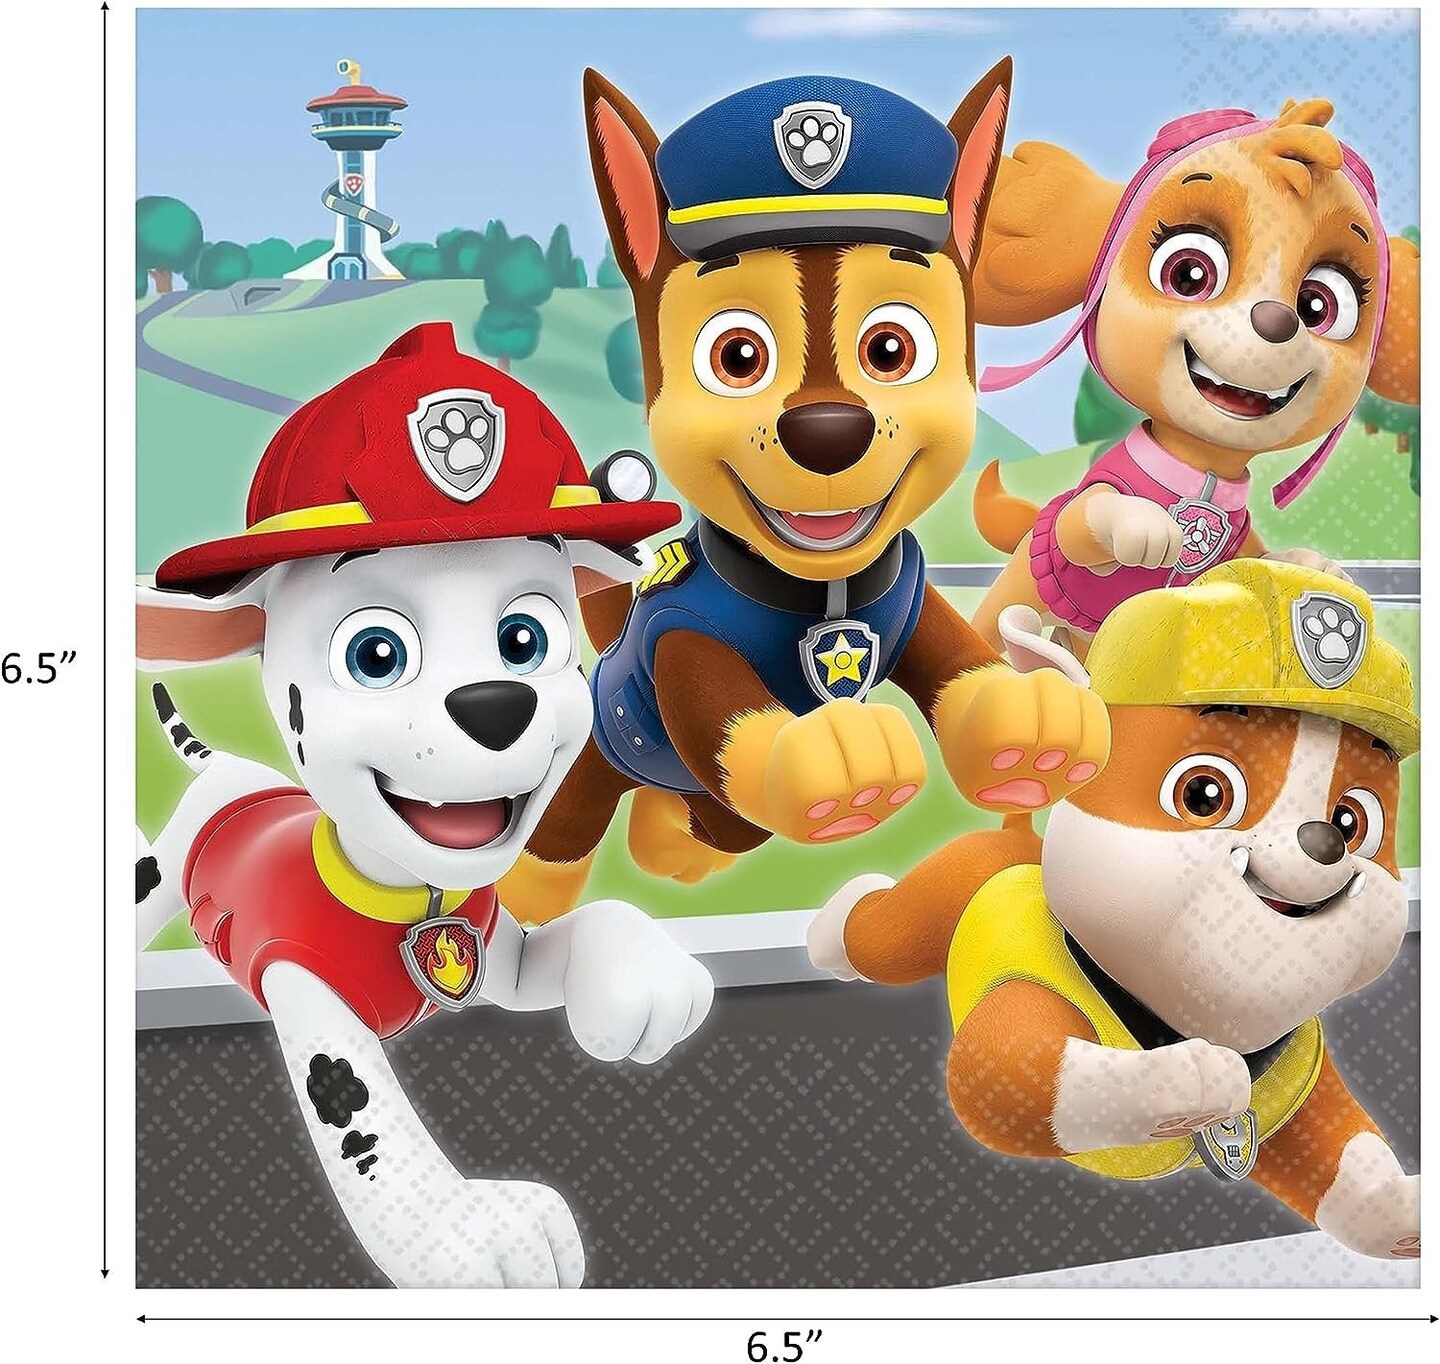 Paw Patrol Birthday Party Supplies Bundle | Paw Patrol Plates | Paw Patrol Napkins | Paw Patrol Cups | Paw Patrol Table Cover | Paw Patrol Decorations (Pack for 16)